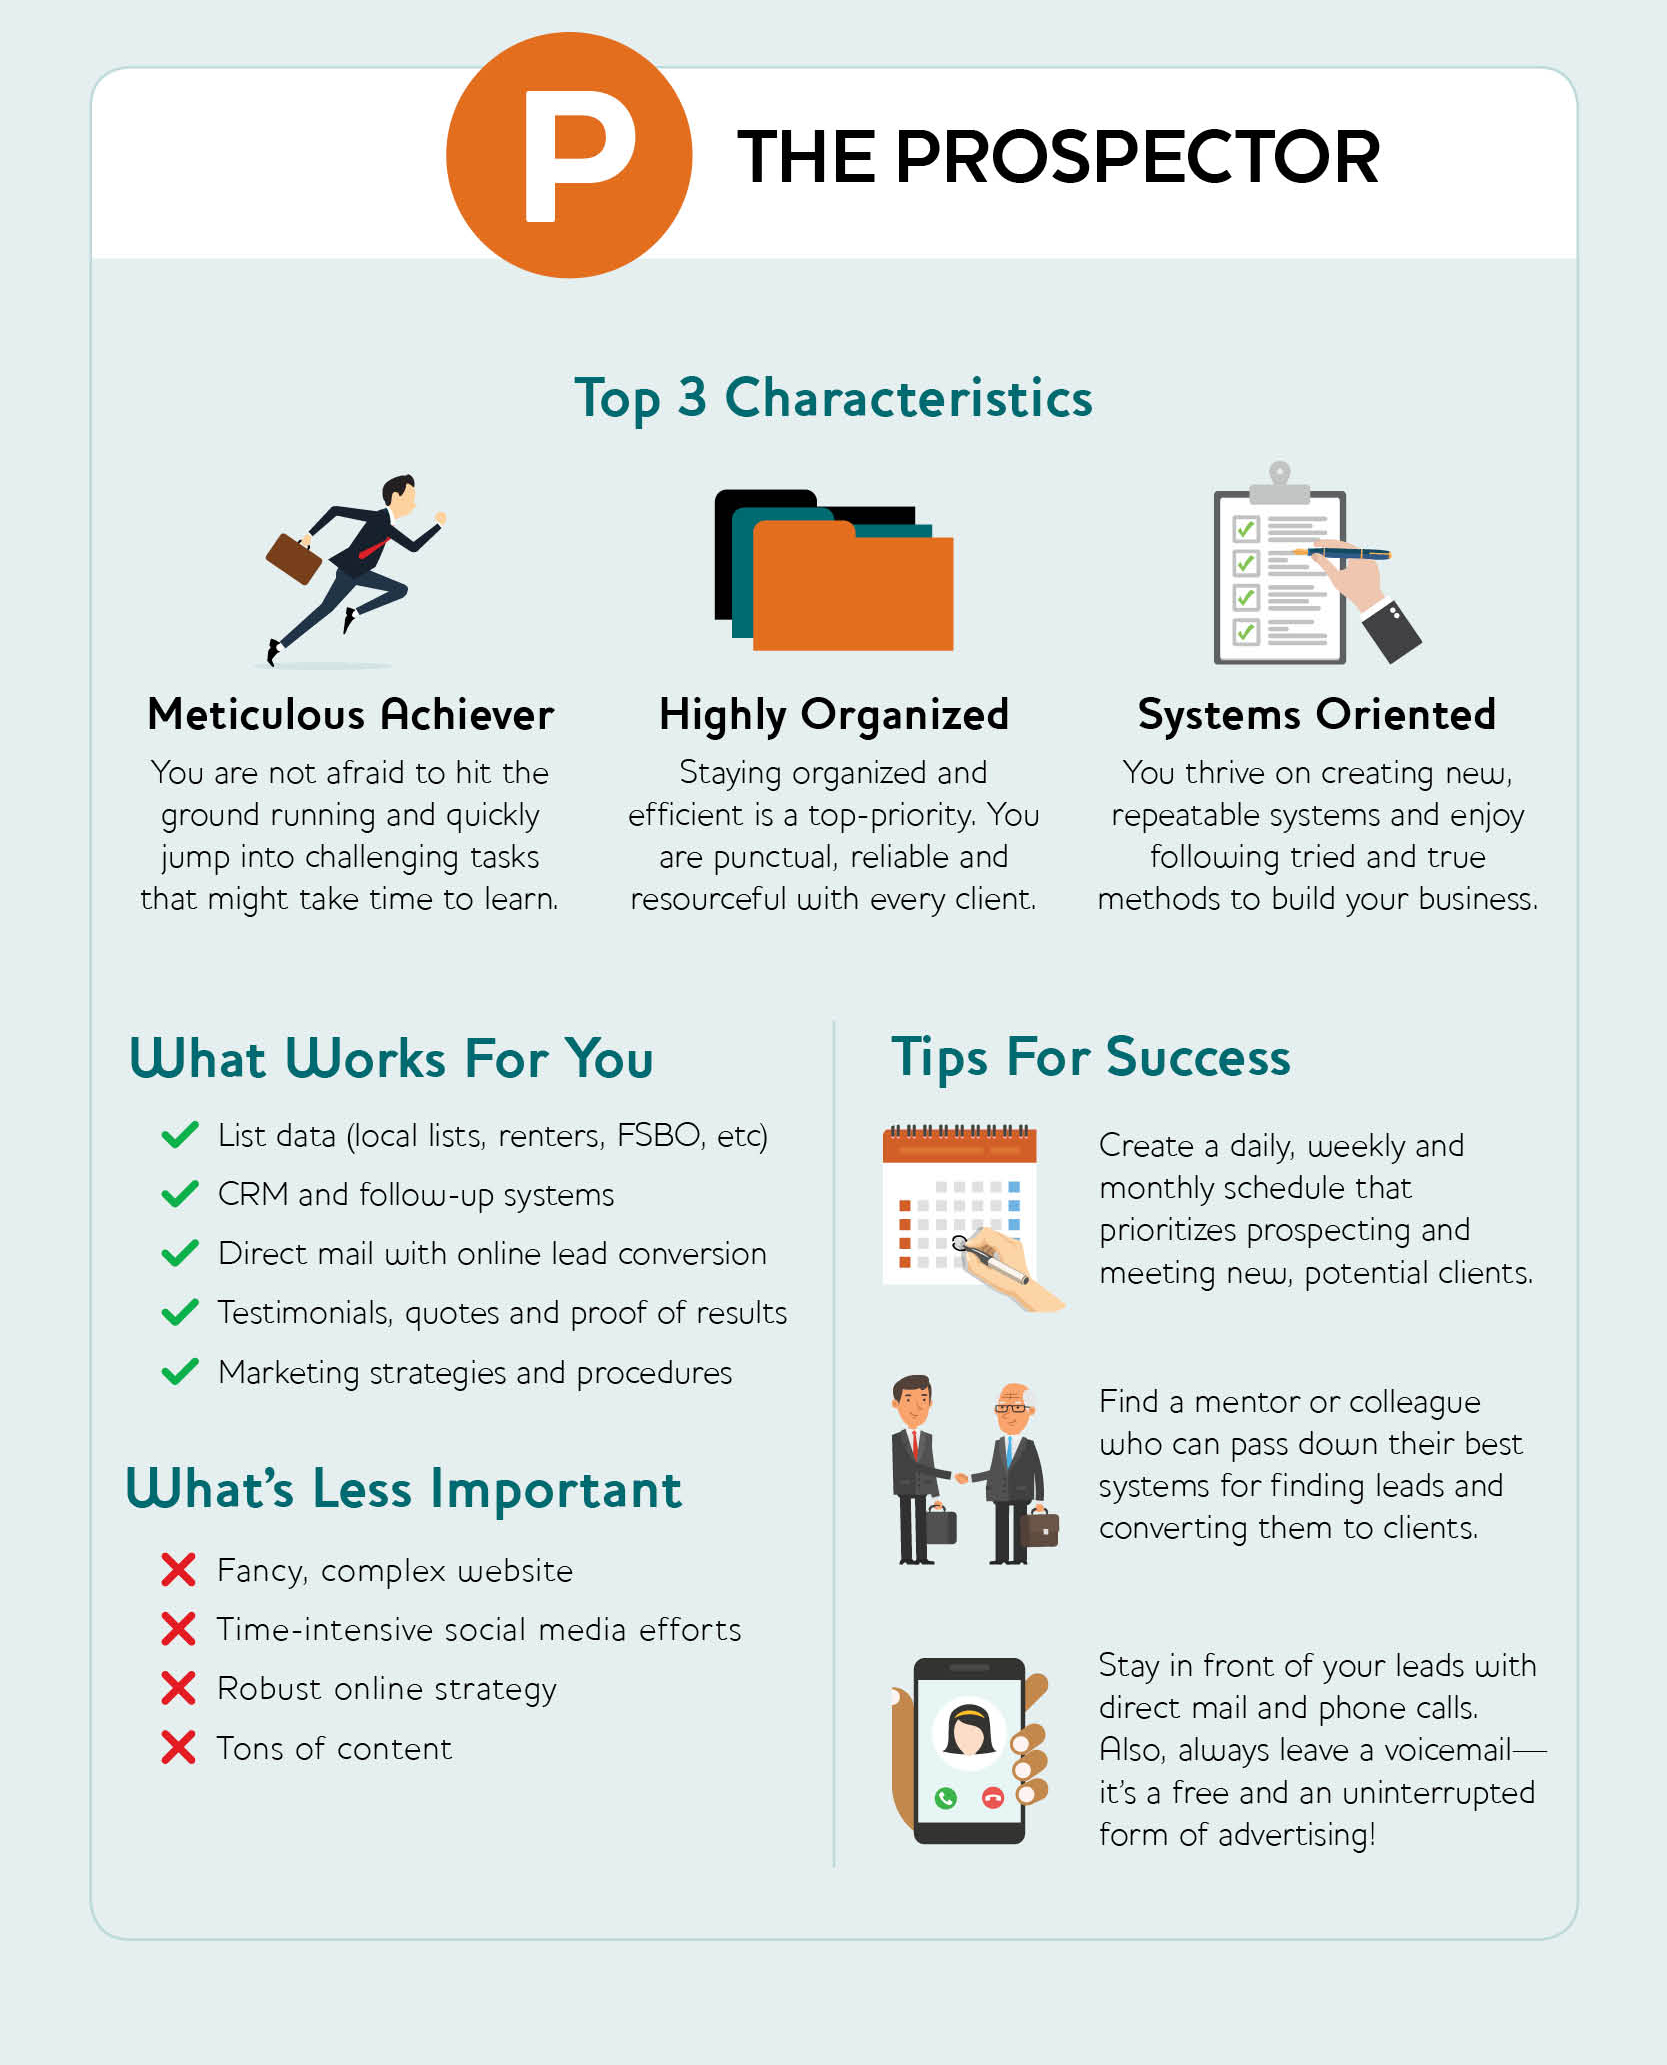 infographic: the prospector - top 3 characteristics, what works best, tips for success